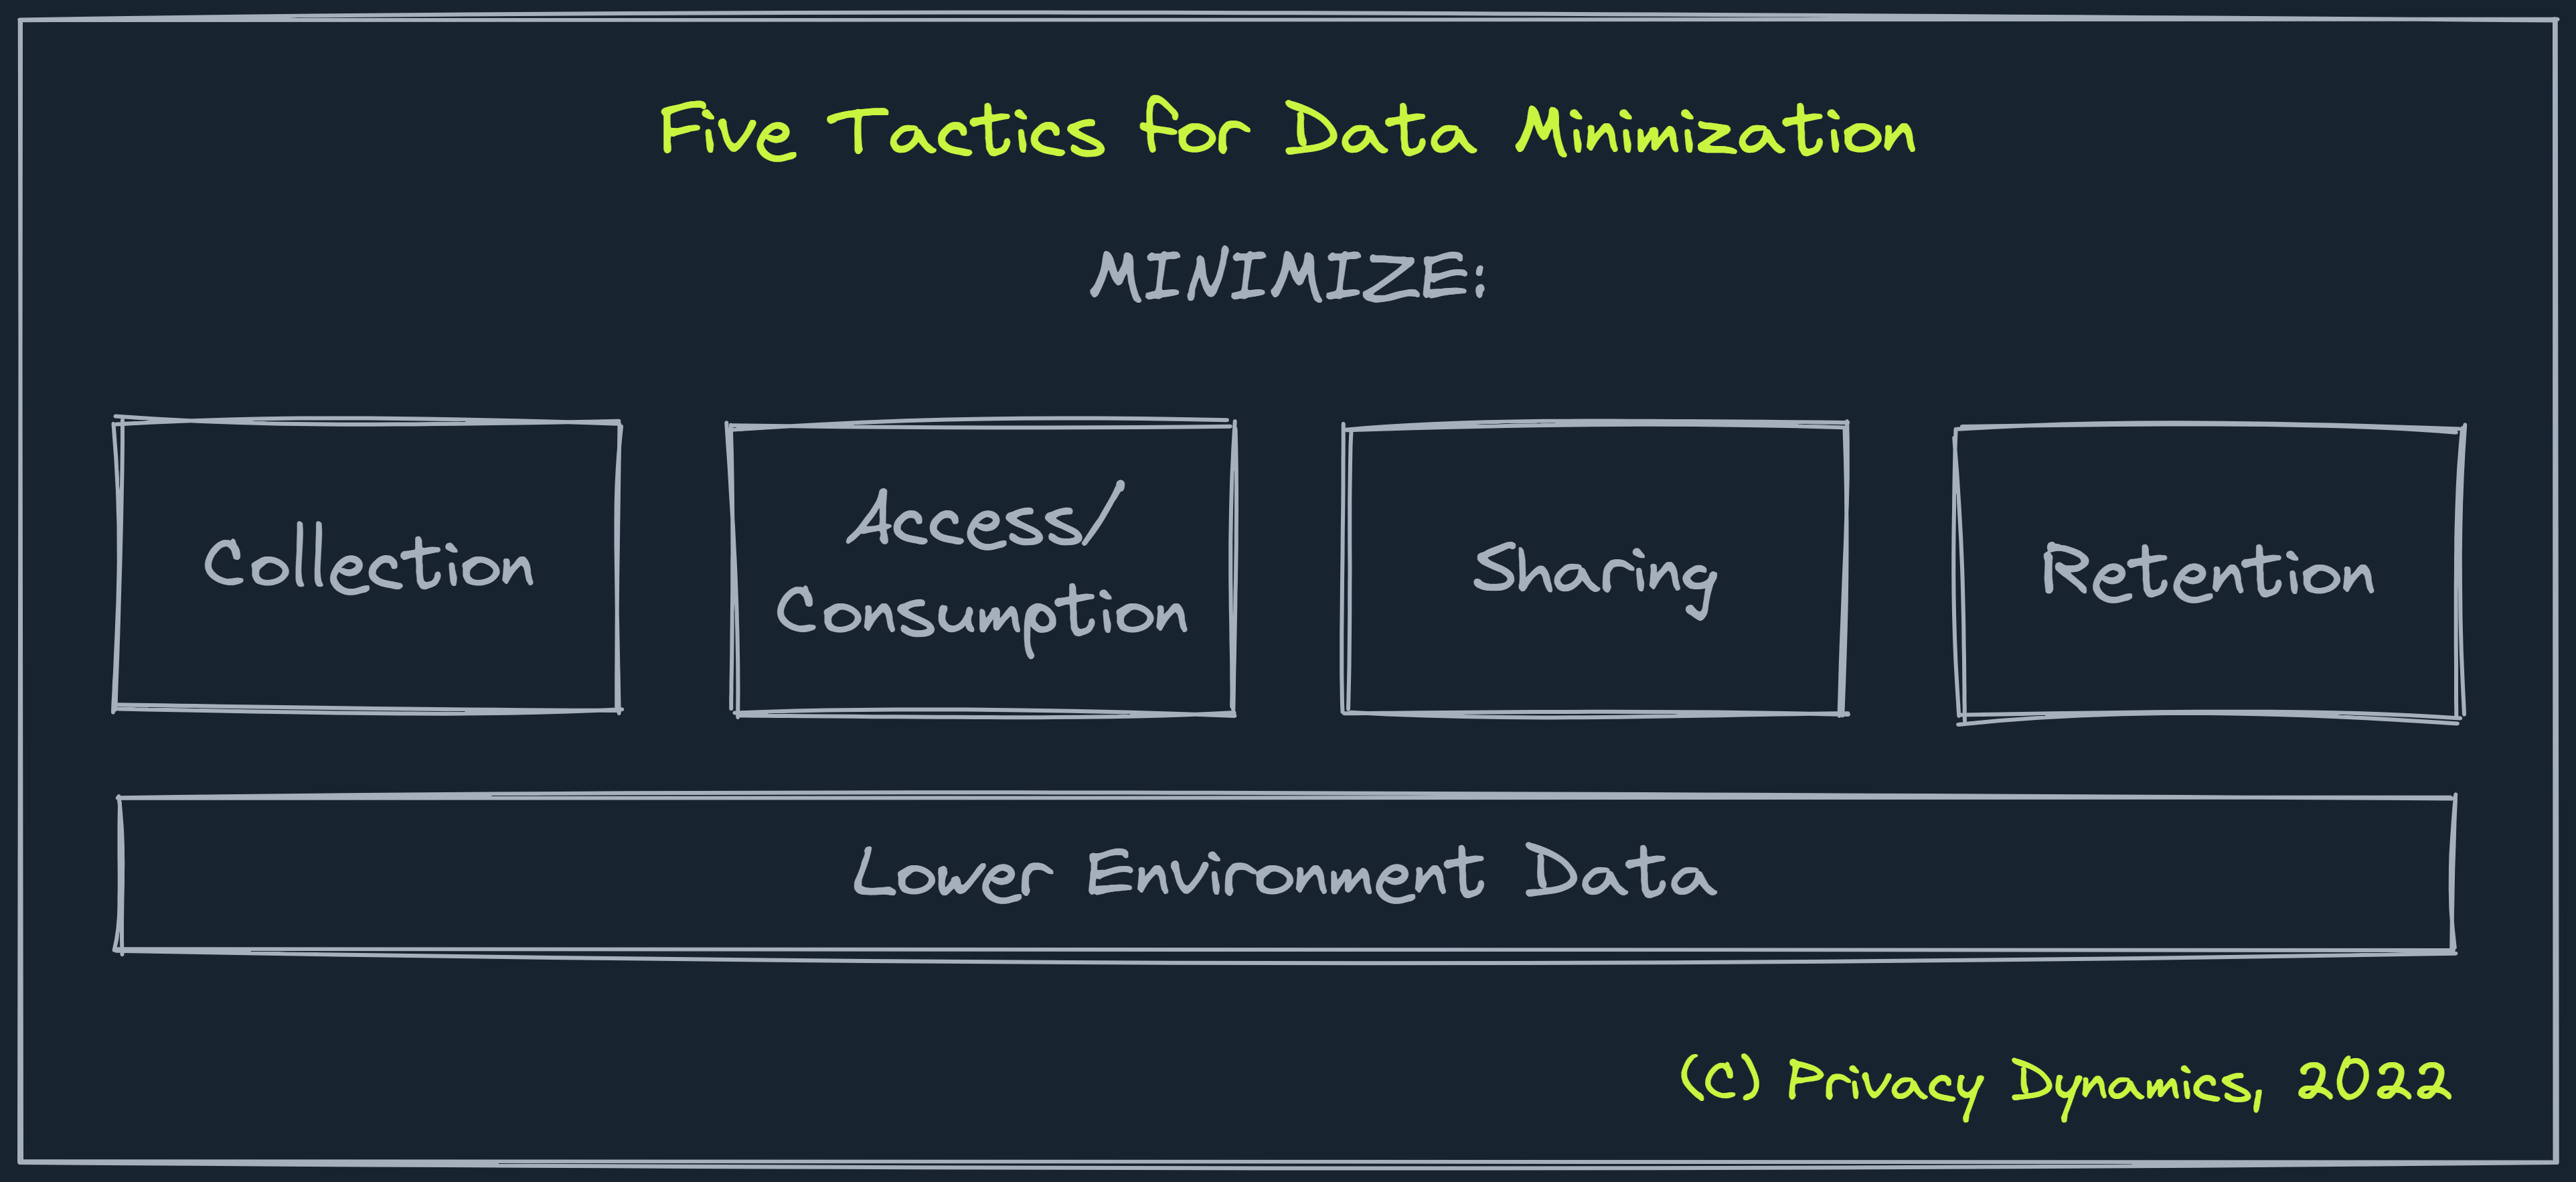 A slide outlining the five tactics of data minimization: minimize collection, minimize access/consumption, minimize sharing, minimize retention, minimize data in lower environments